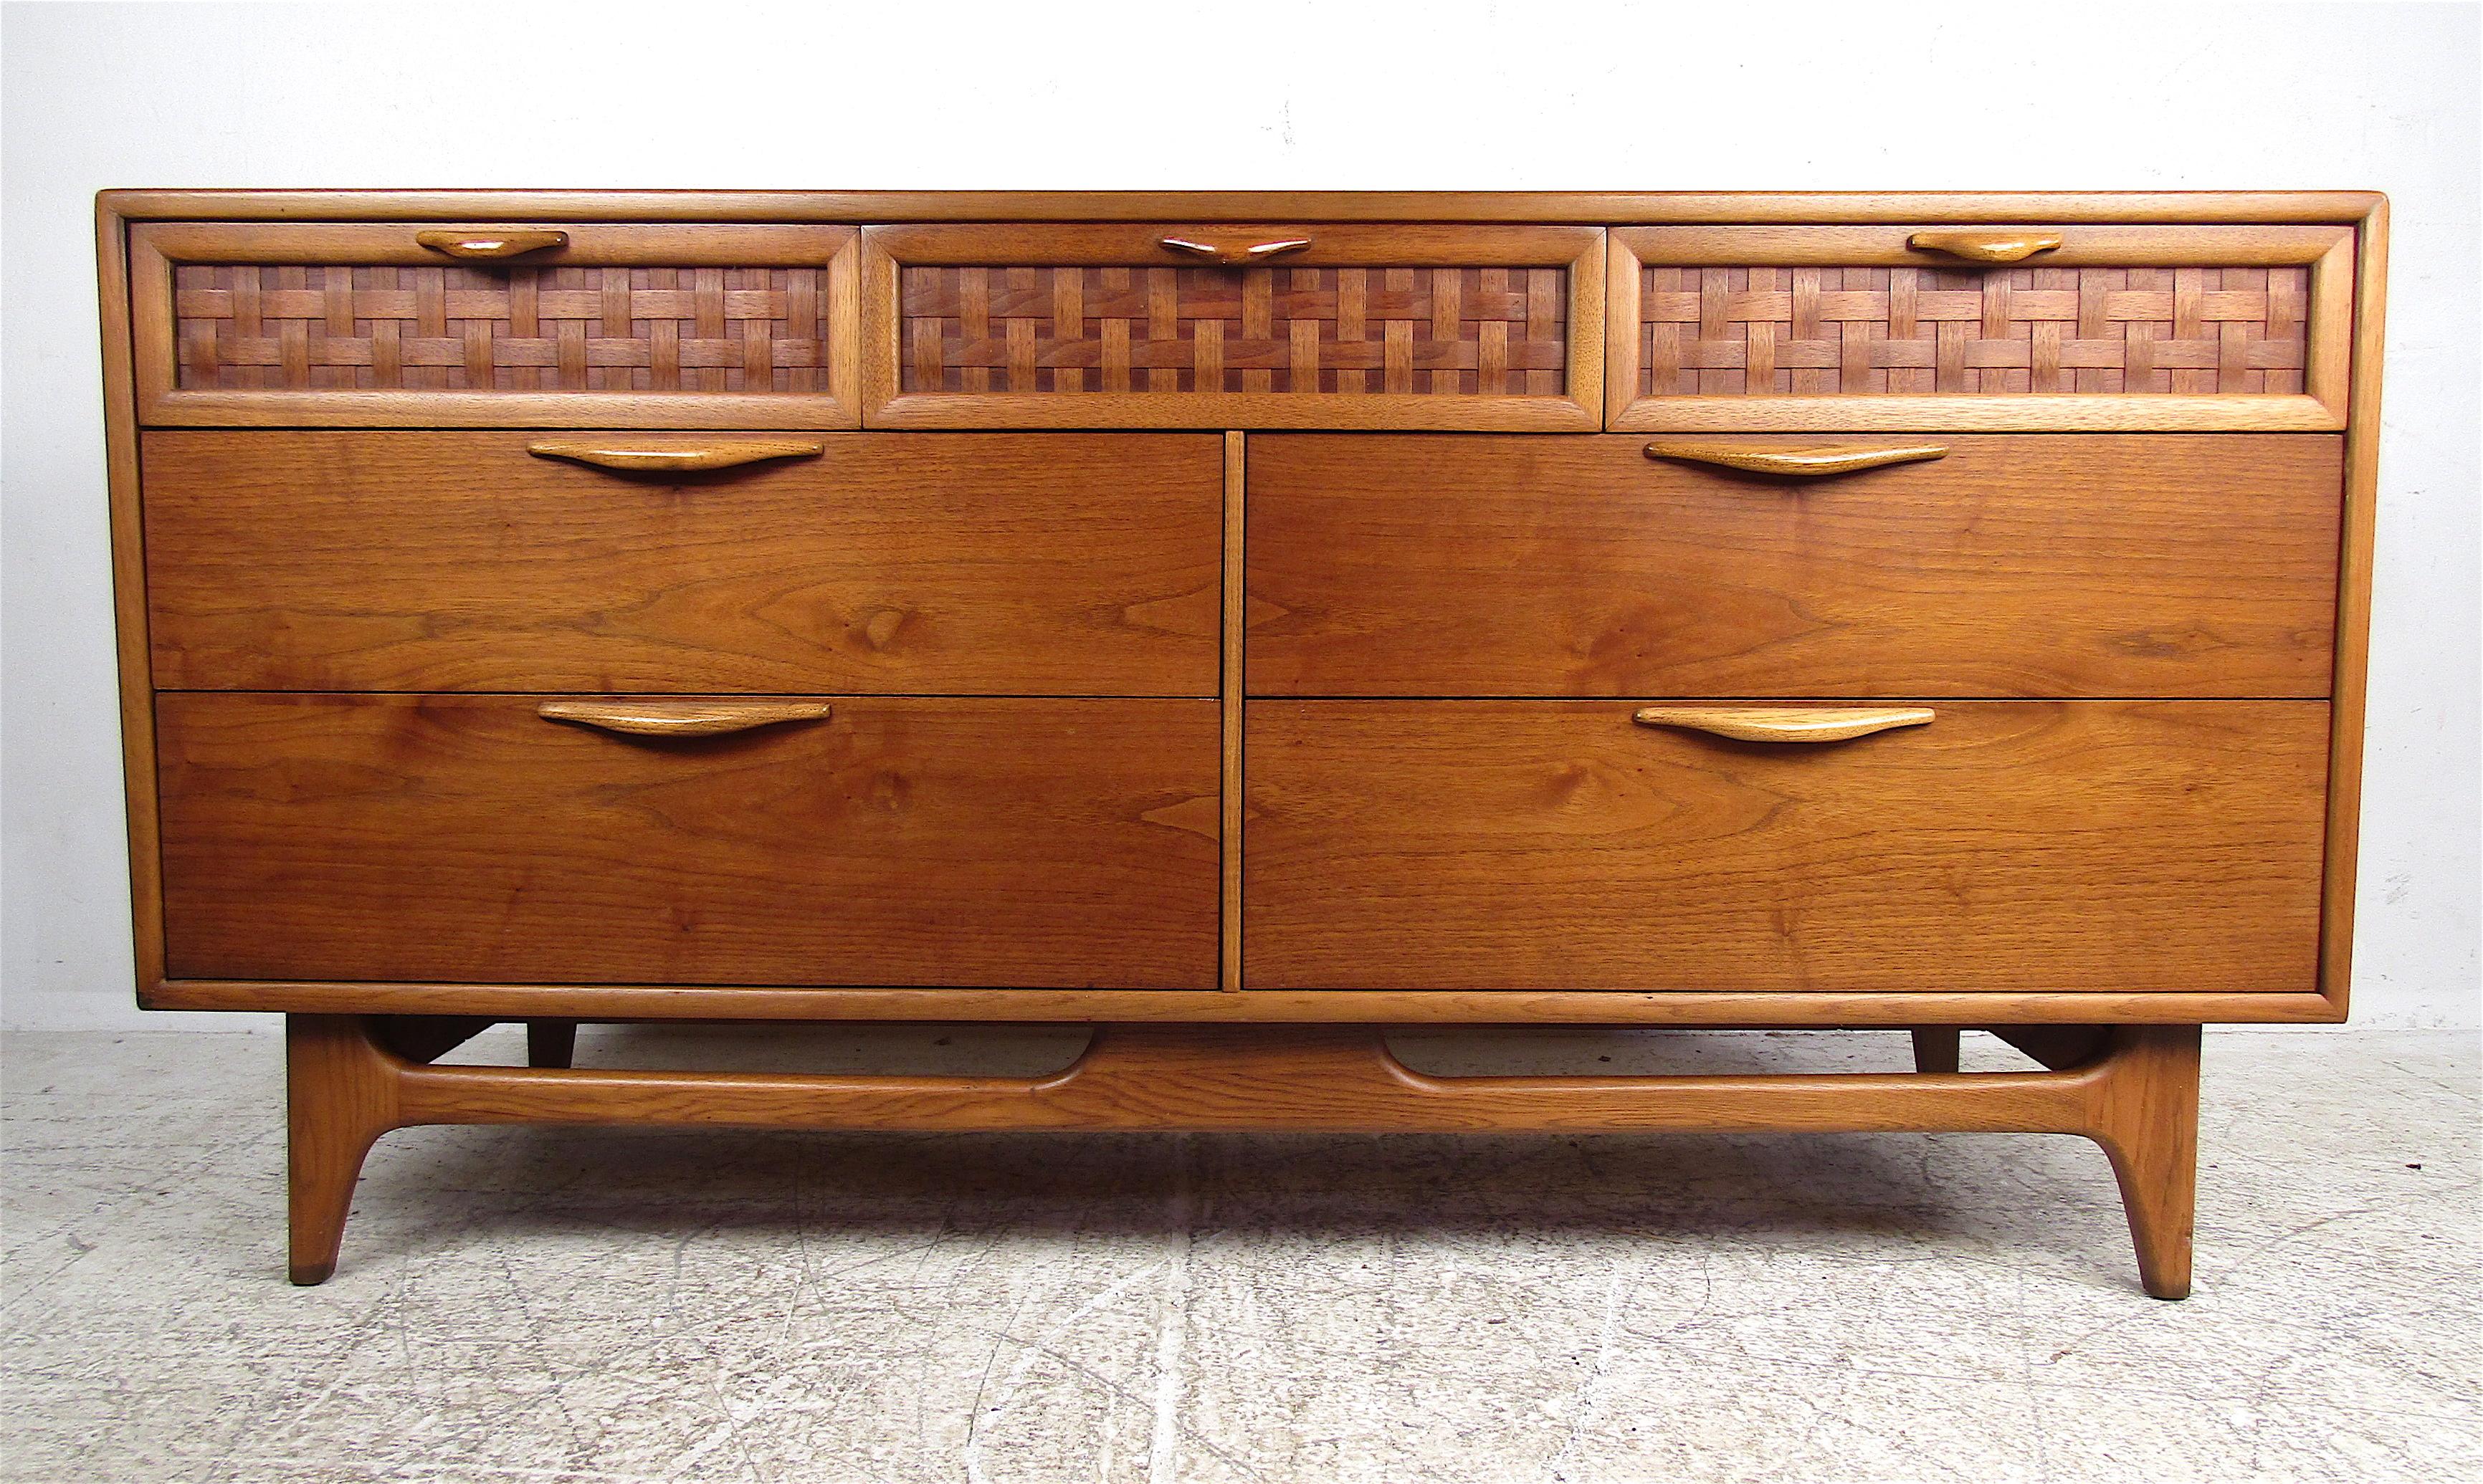 This beautiful vintage walnut dresser by Lane boasts three top drawers with woven fronts. A sculpted base with tapered legs and a stretcher ensures maximum sturdiness without sacrificing style. The unique carved drawer pulls and straight lines add